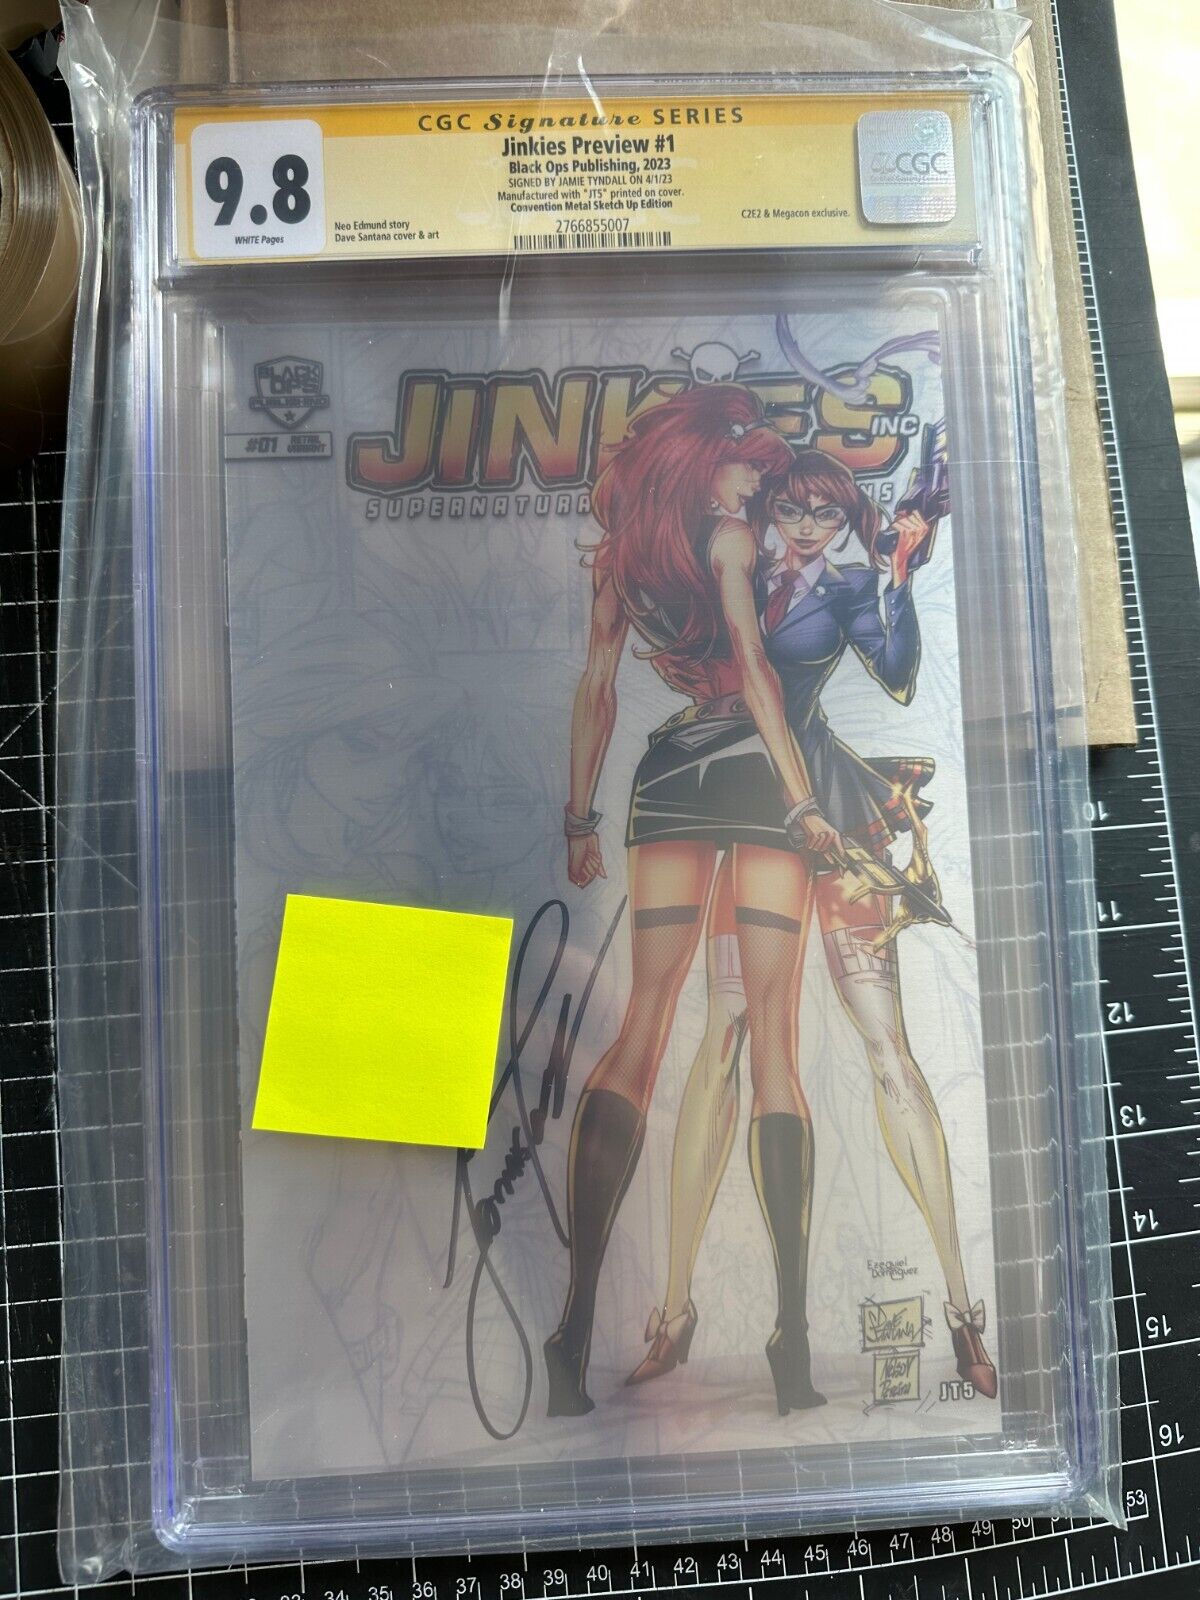 BLACK OPS JINKIES PREVIEW #1 CON METL ARTIST PROOF Var CGC SS 9.8 Signed Tyndall